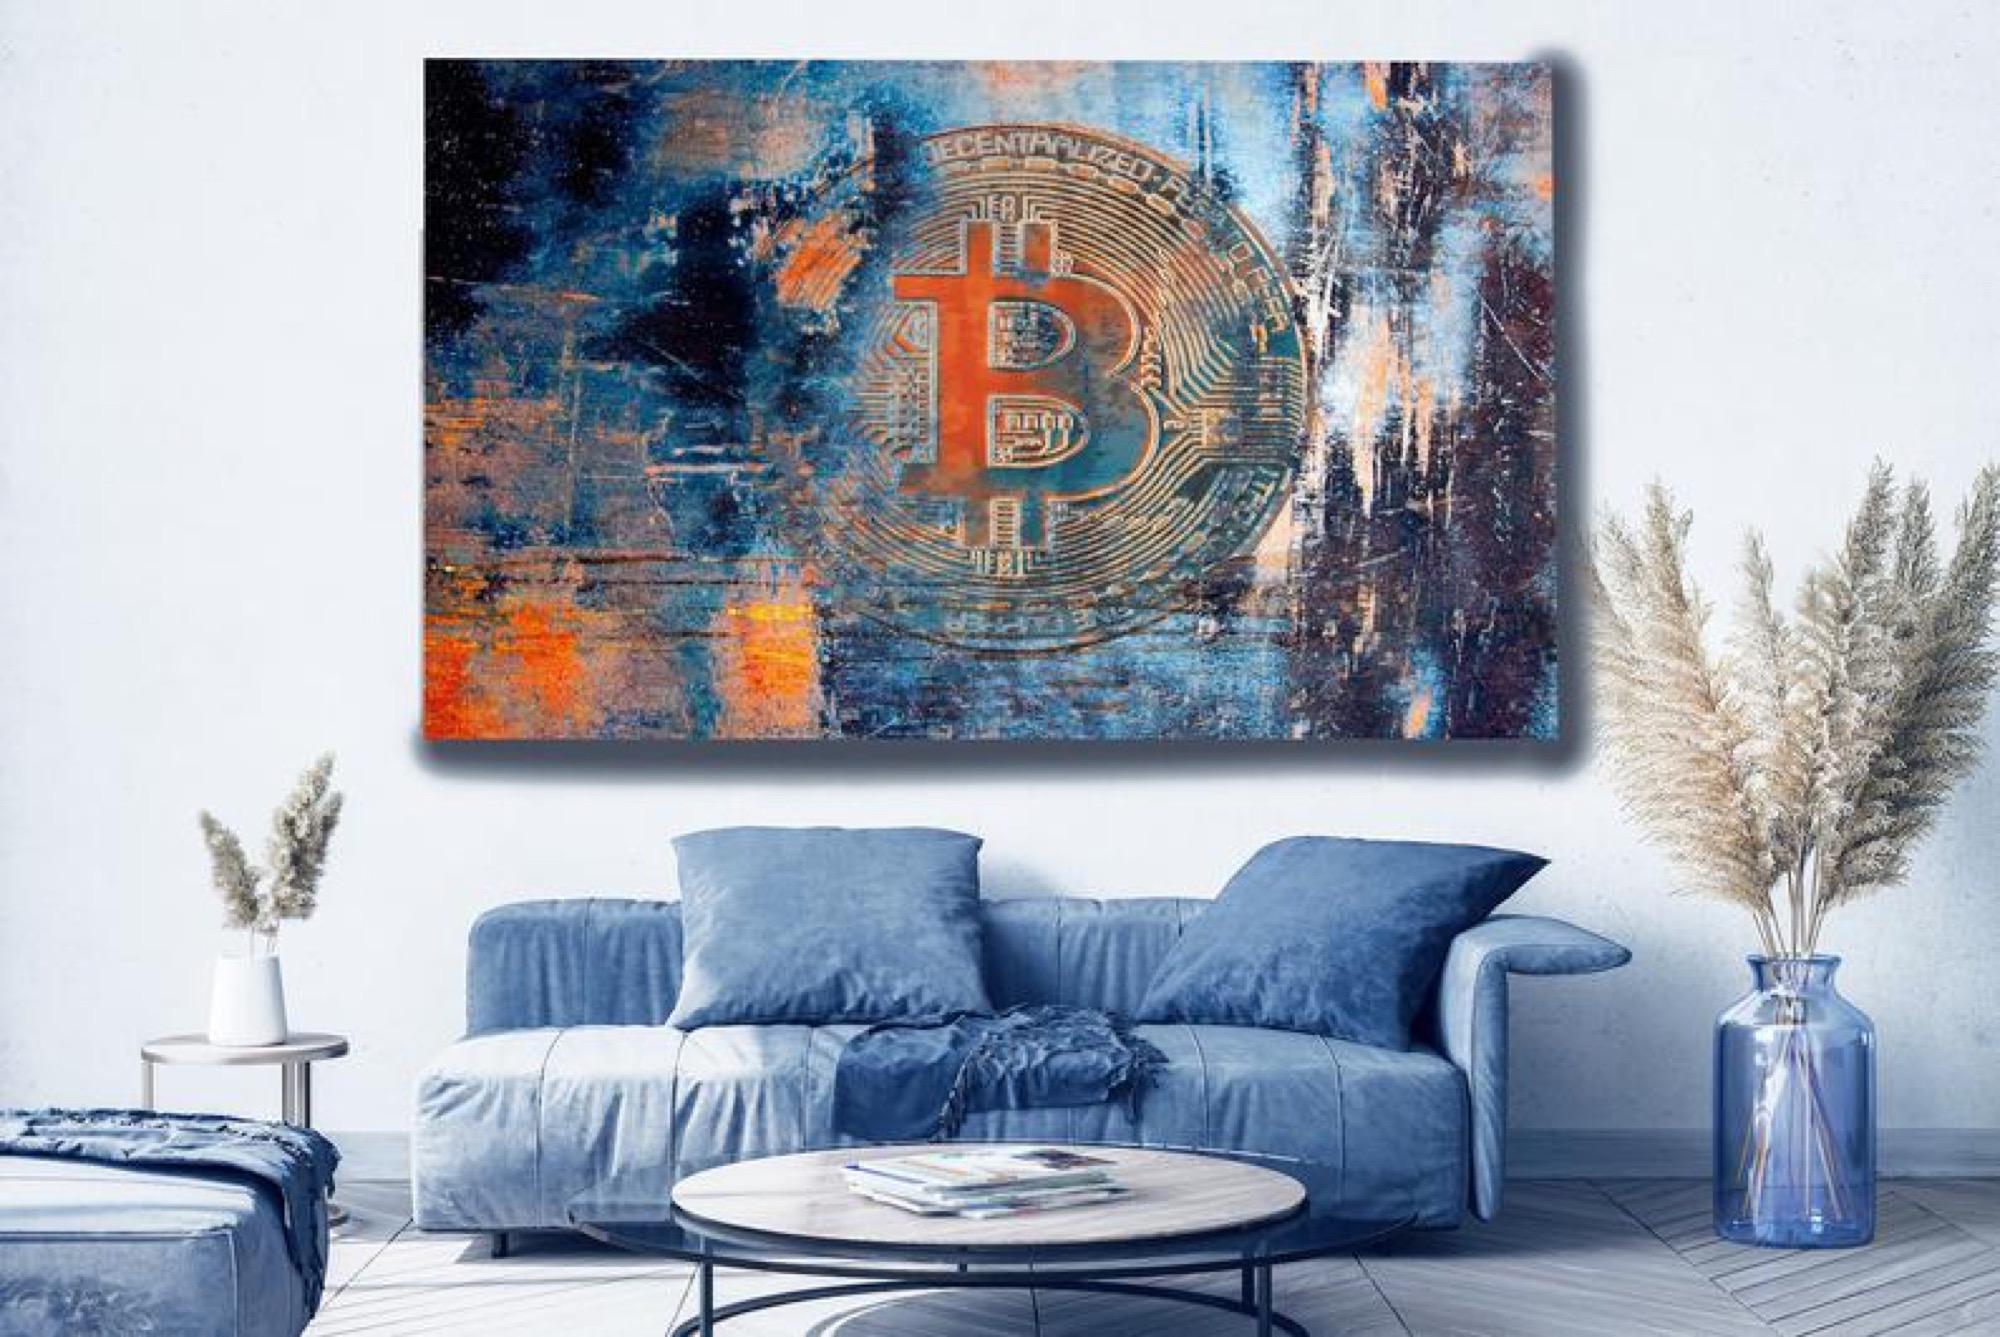 BTC, Bitcoin Abstract Canvas Art, Cryptocurrency Bitcoin Painting H48"XW70" - Mixed Media Art by Irena Orlov